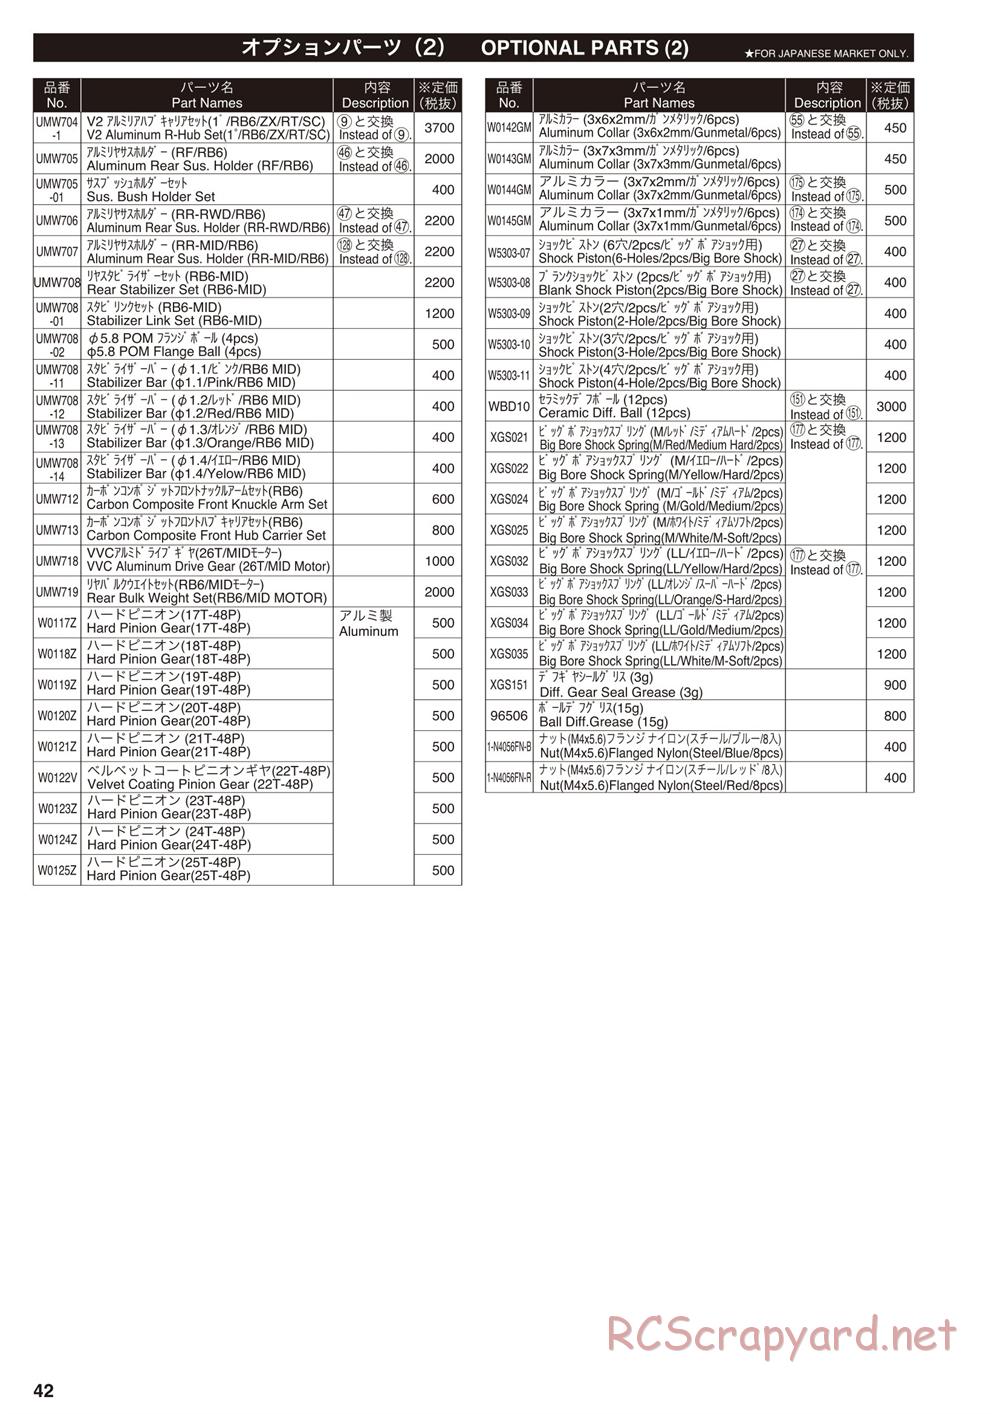 Kyosho - Ultima SC6 - Parts List - Page 3